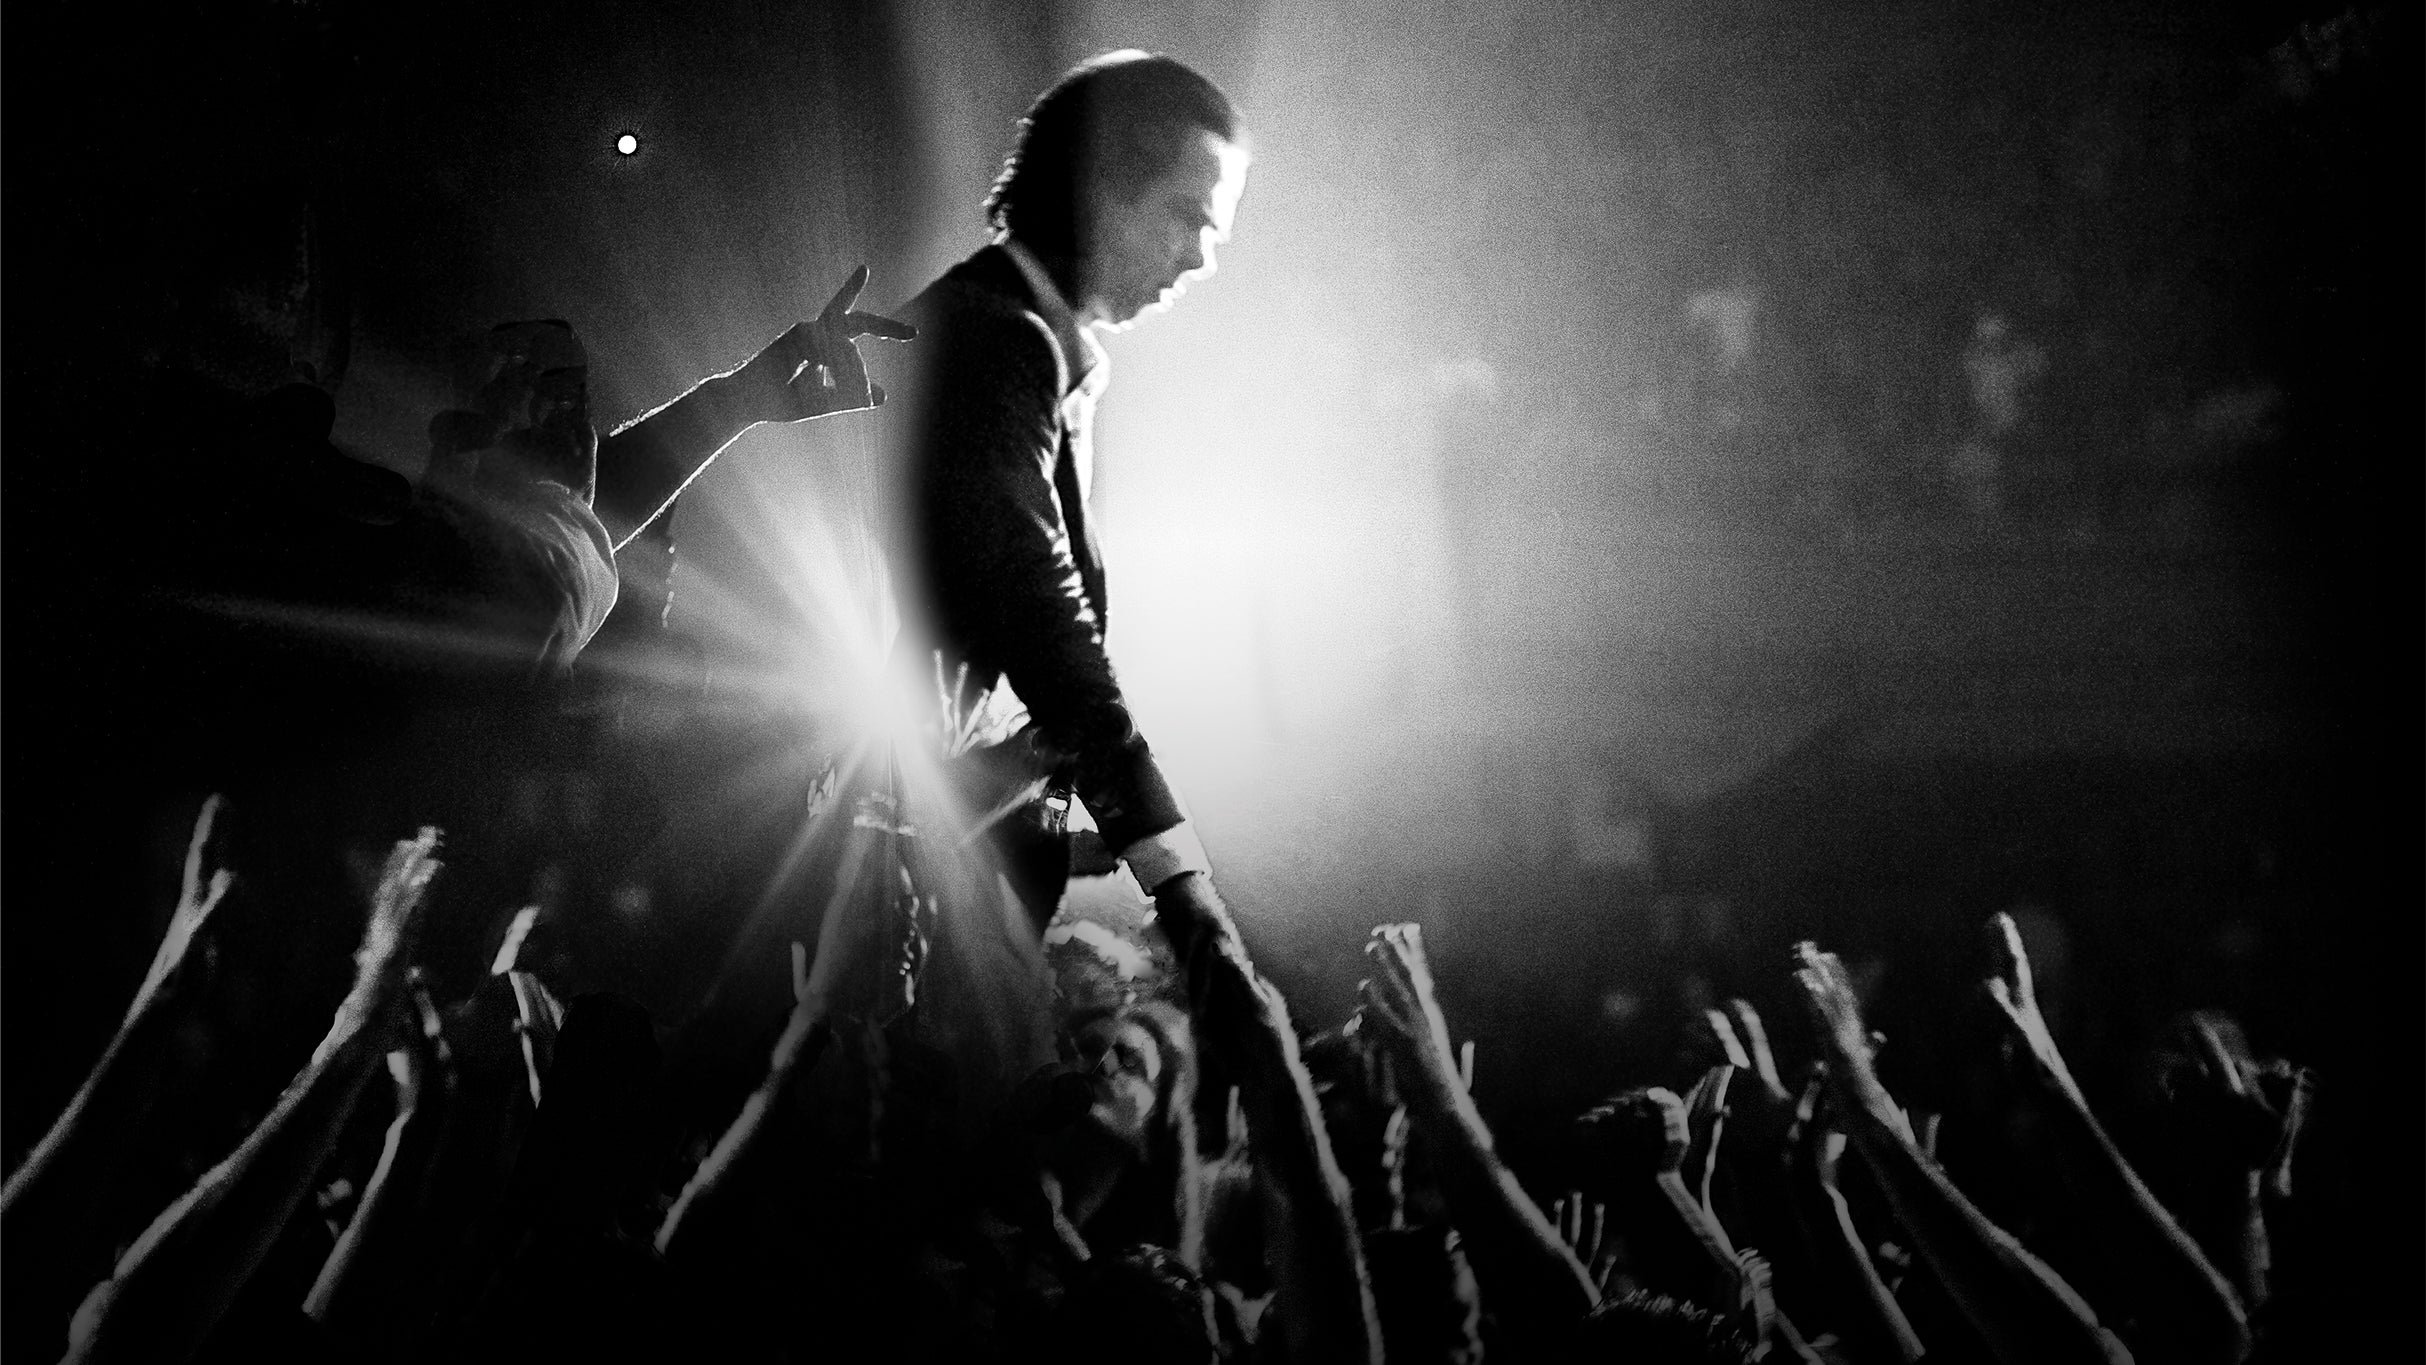 Nick Cave & the Bad Seeds : The Wild God Tour in Manchester promo photo for Three presale offer code